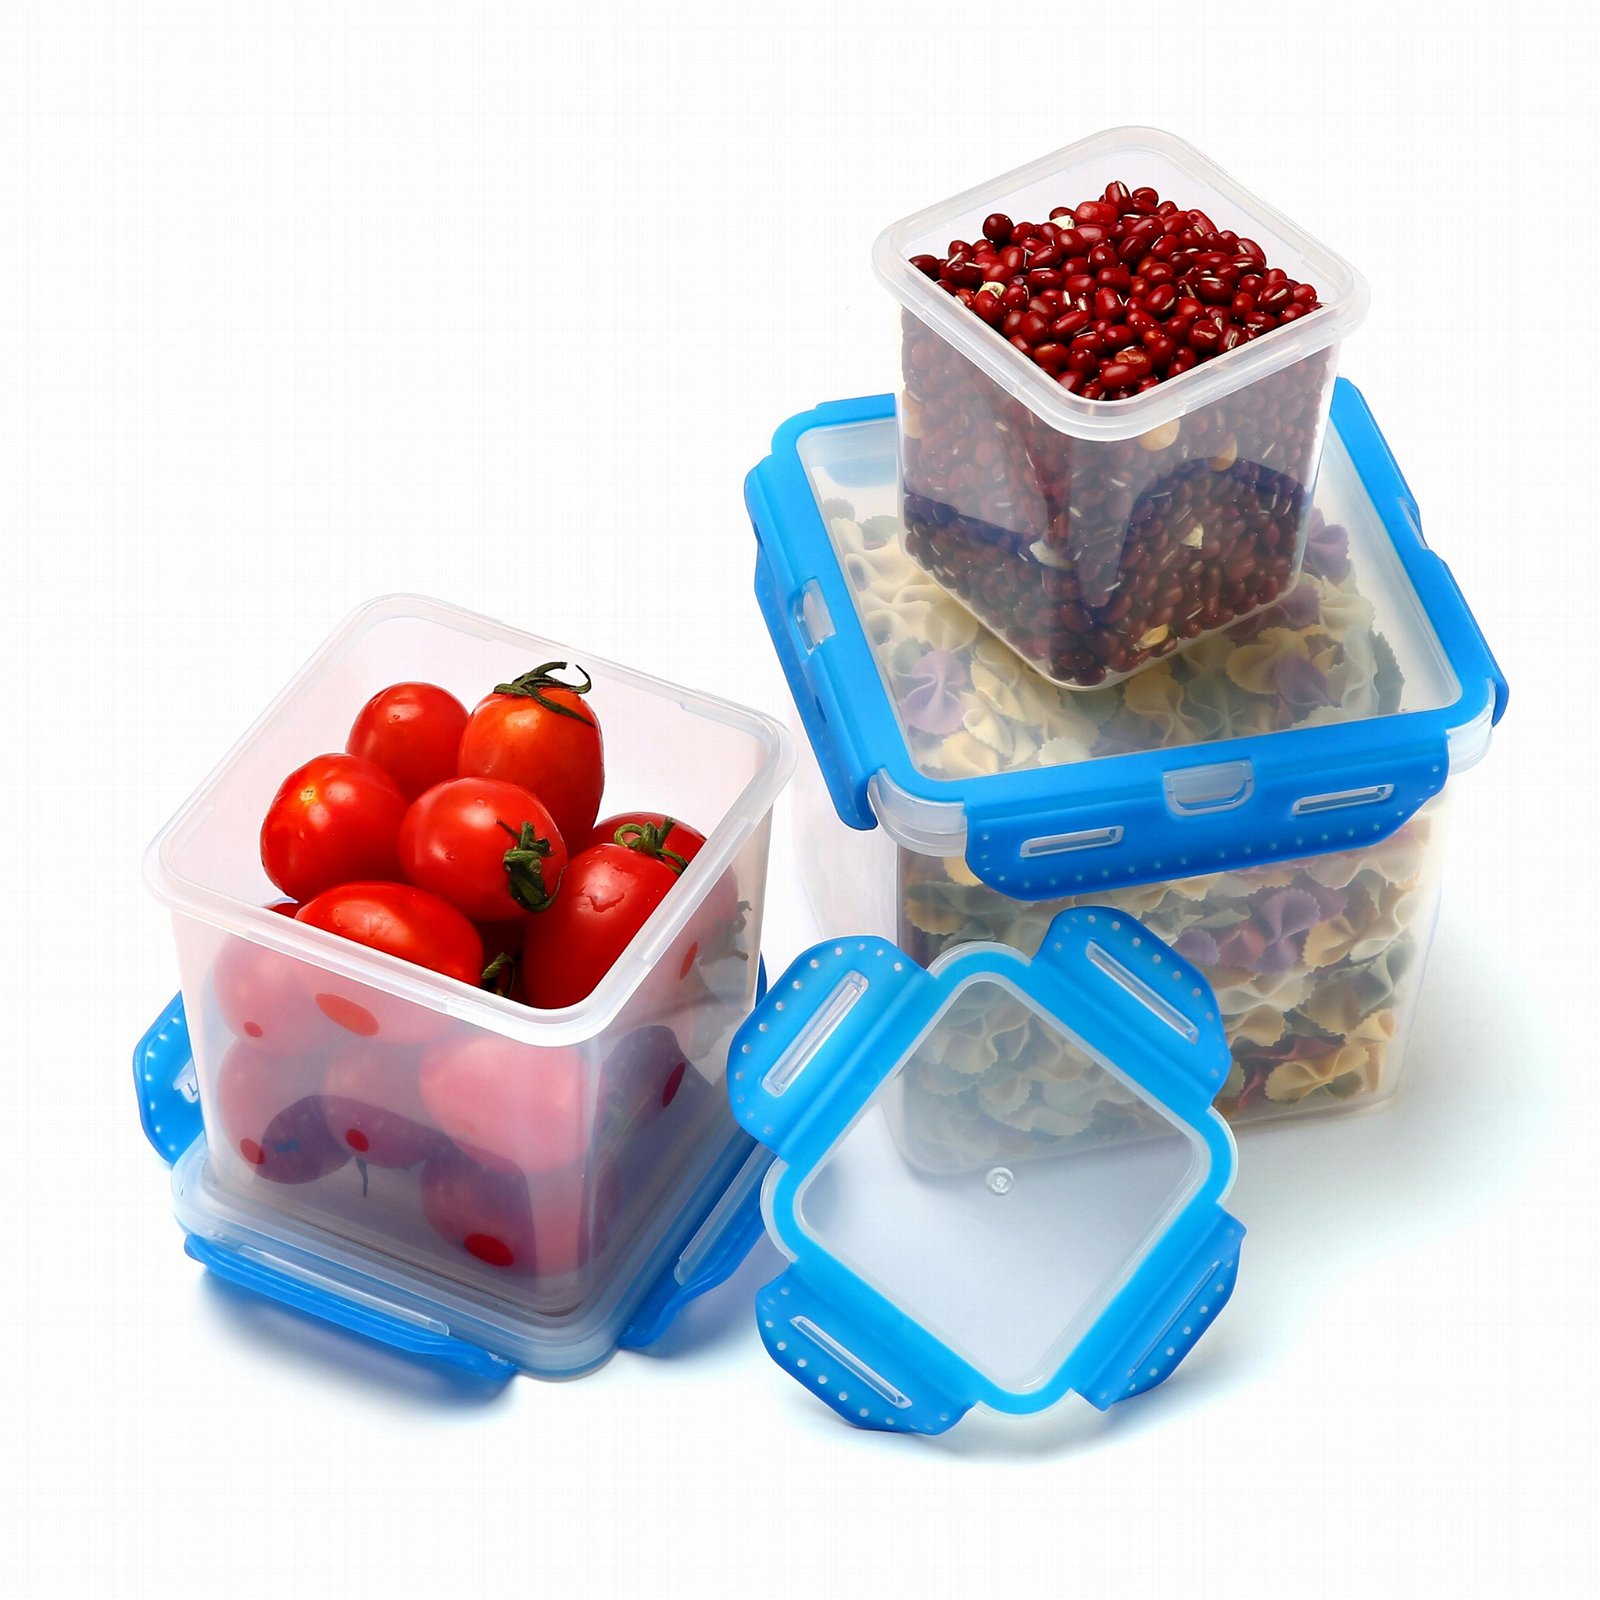 250ml Zhenqi Portable Sealed Fruit Preservation Box Food storage container 2